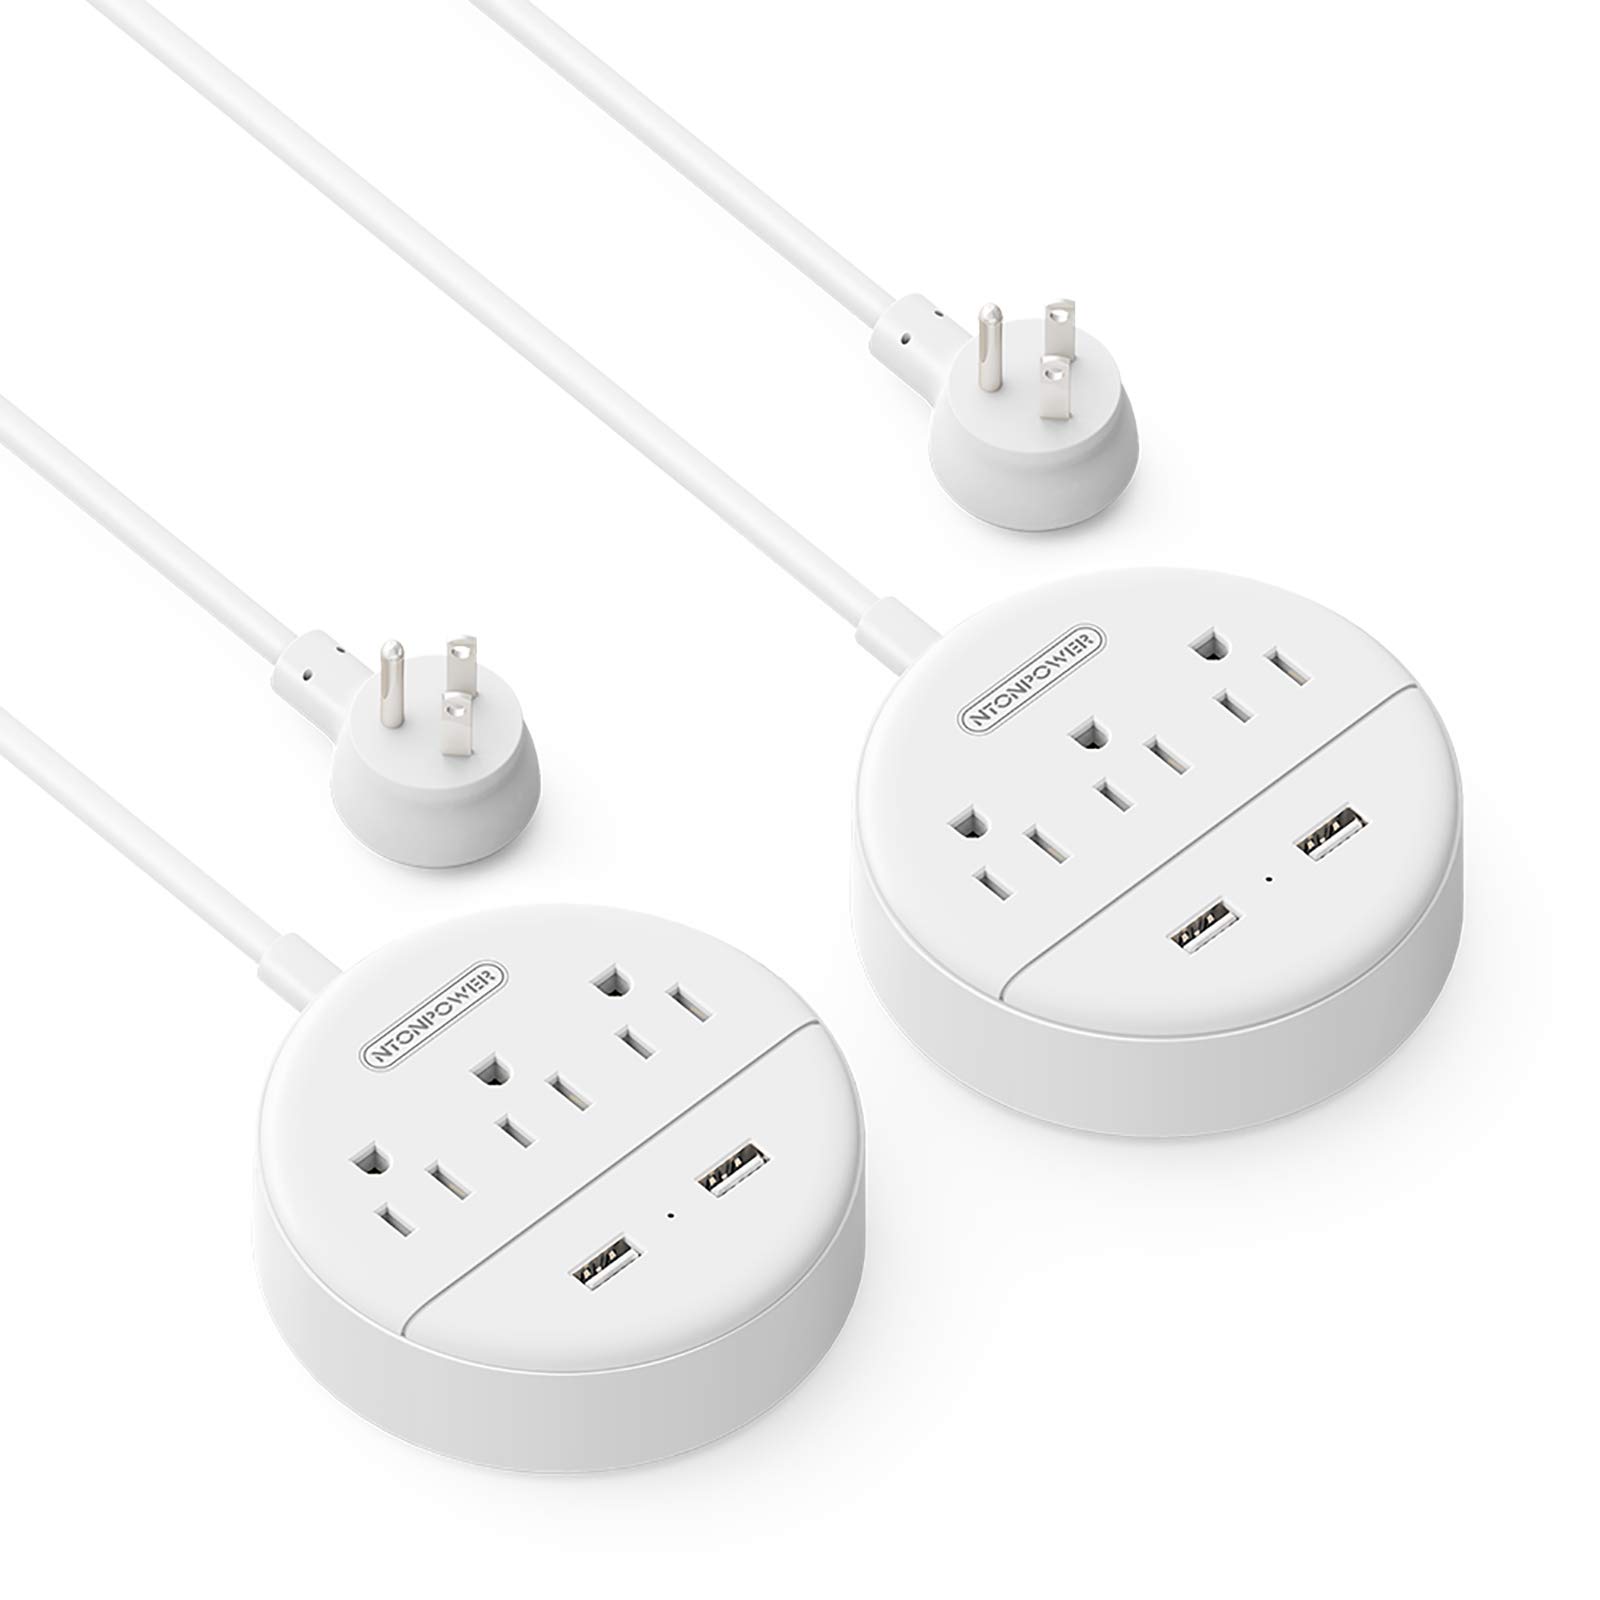 Book Cover 2 Pack Travel Power Strip, NTONPOWER Flat Plug Power Strip with USB, 3 Outlet 2 USB Desktop Charging Station with 5ft Power Cord Wall Mount for Cruise, Travel, Hotel, Nightstand and Office, White 5 ft Cord - 2 Pack